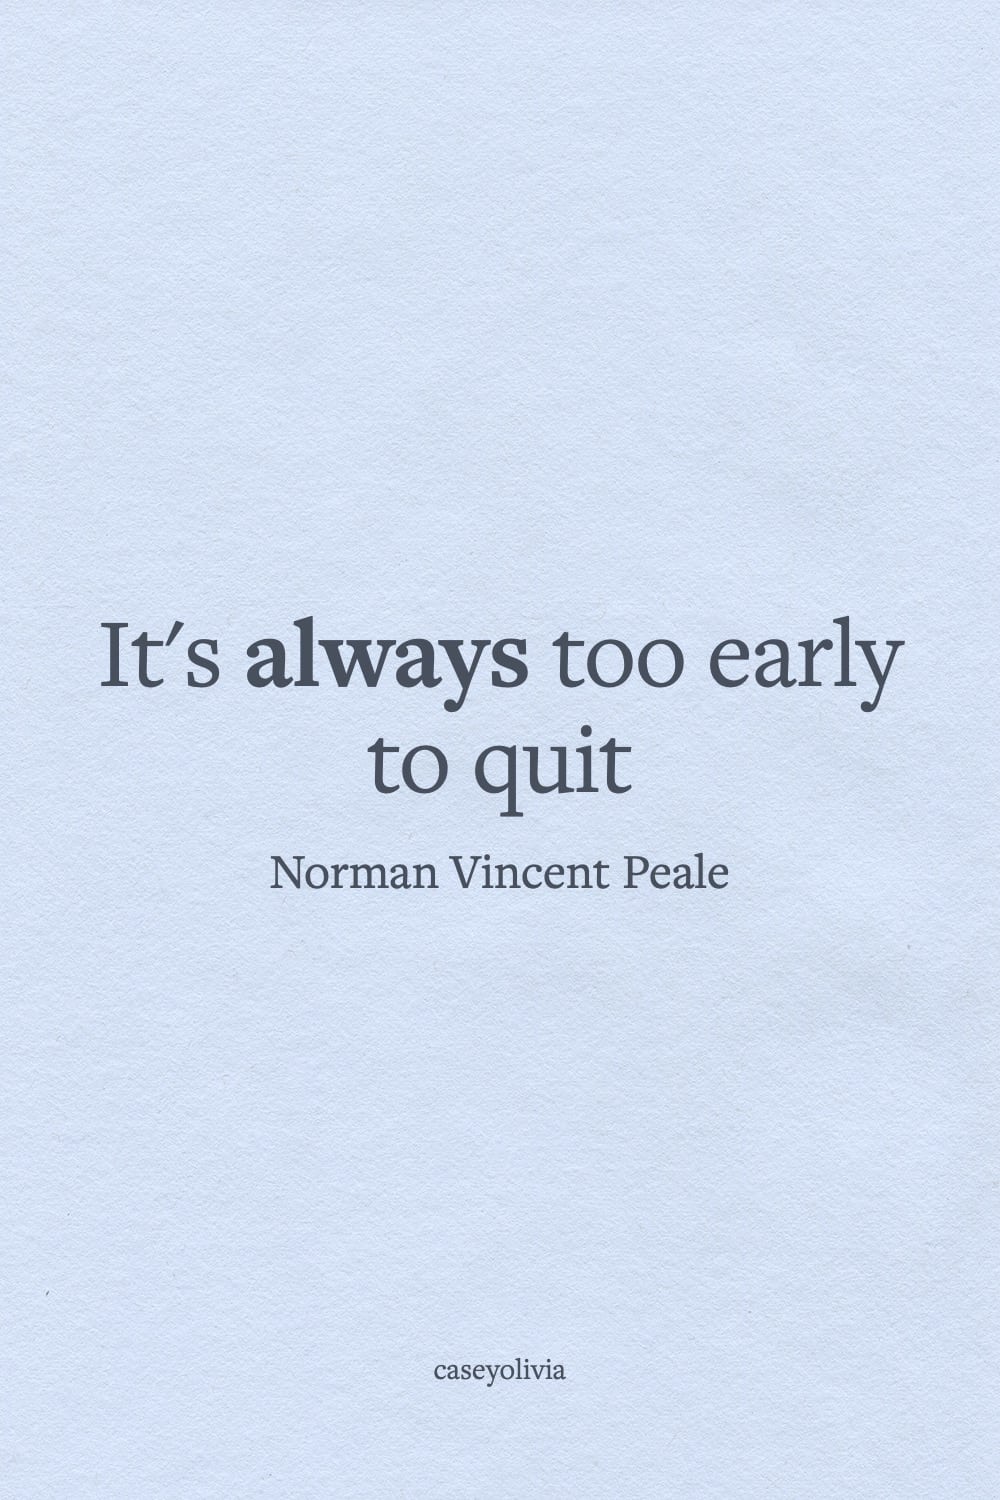 norman vincent peale too early to quit